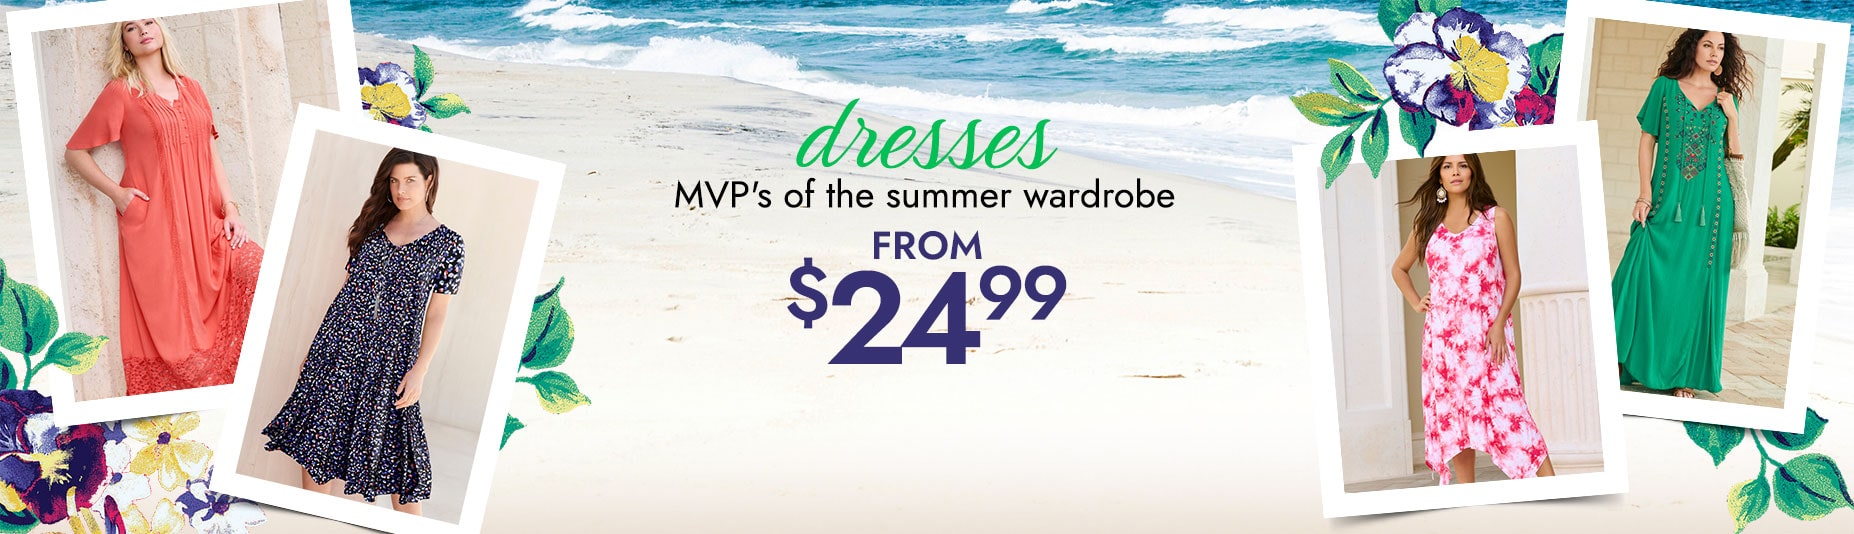 Dresses from $24.99